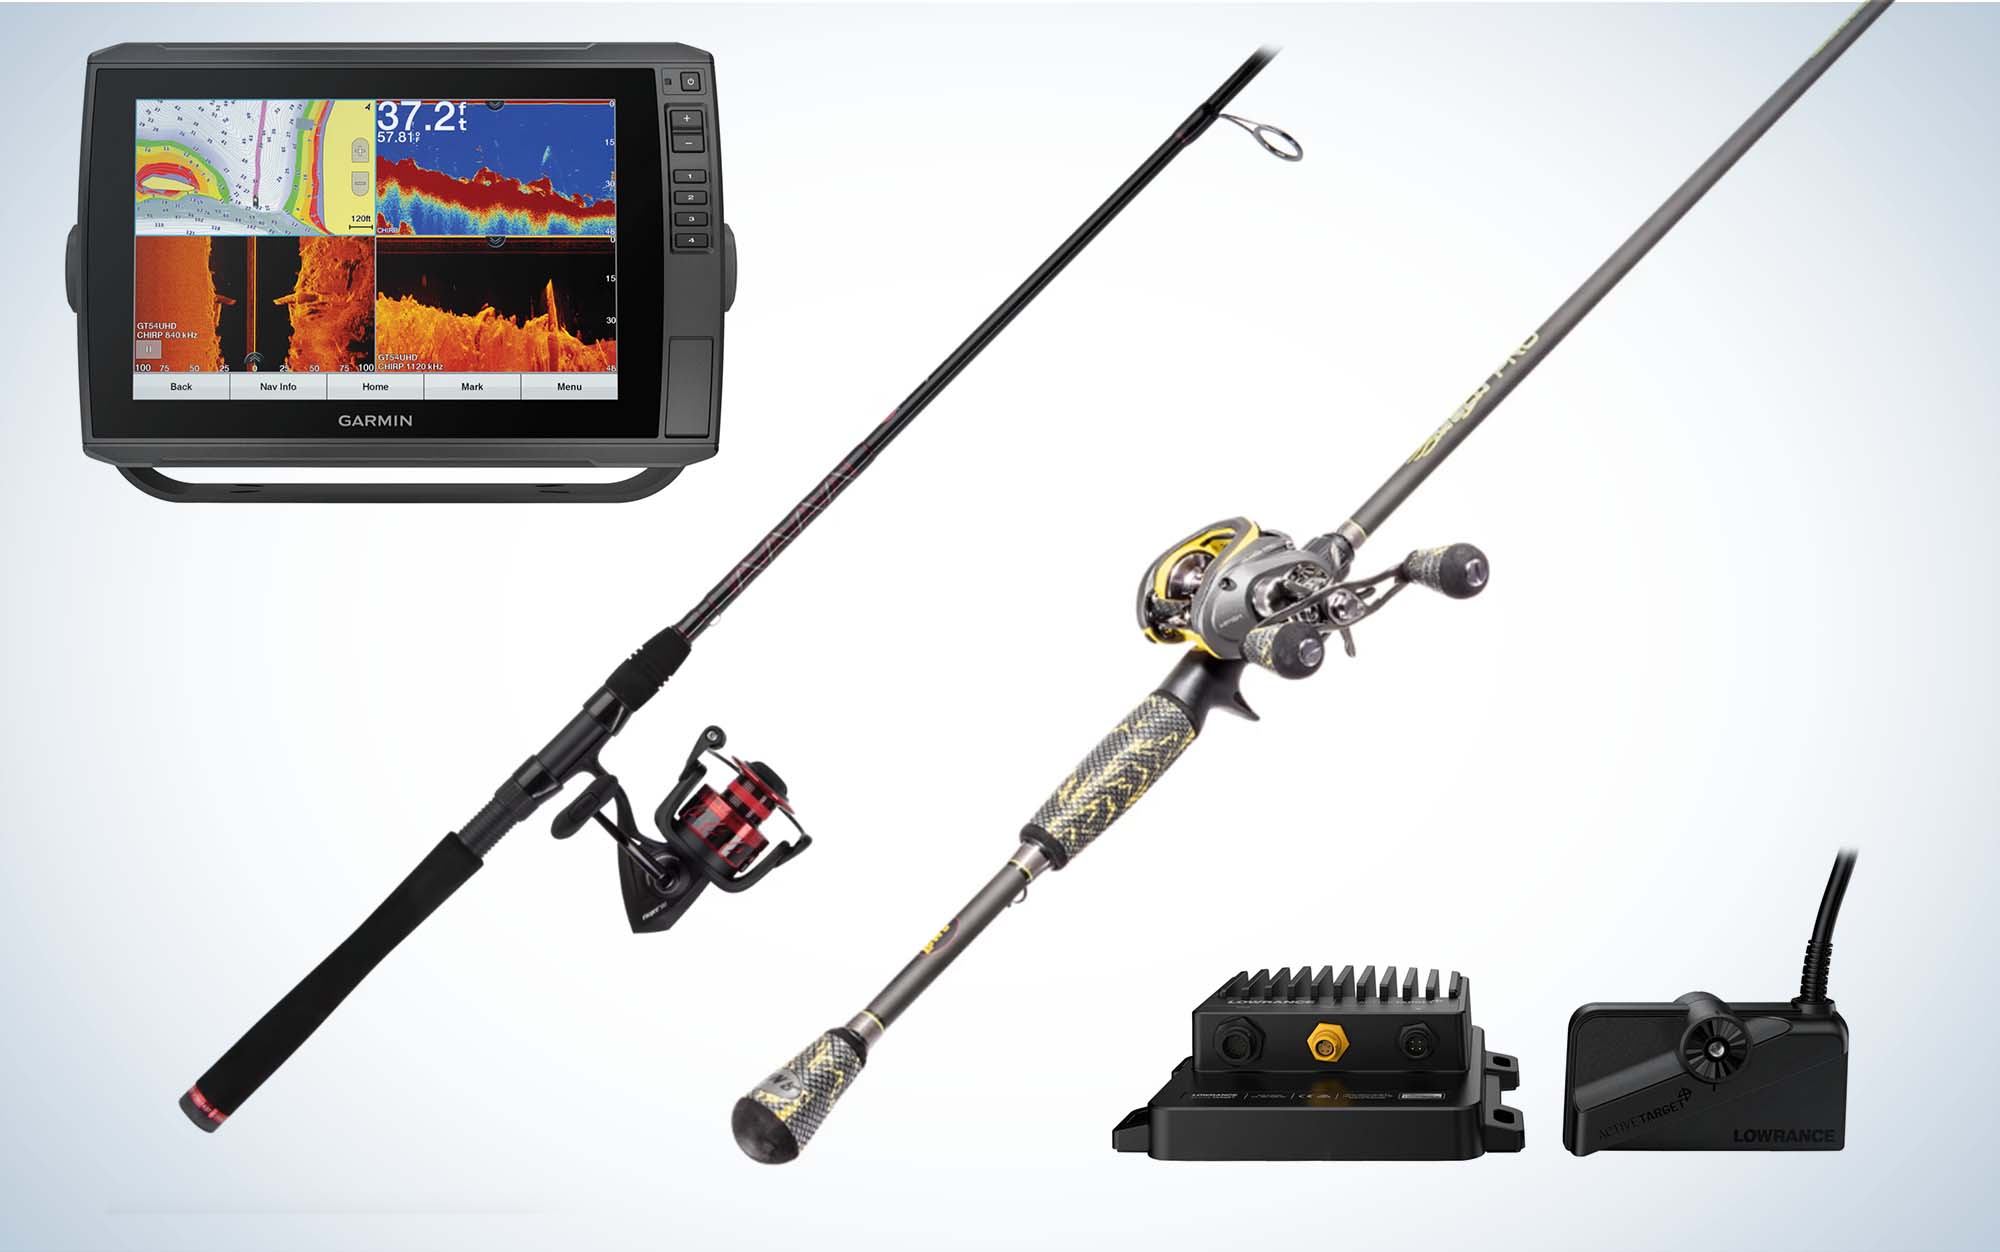 Bass Pro Shops Spring Fishing Classic Sale: Great Deals on Electronics, Rods, and Reels